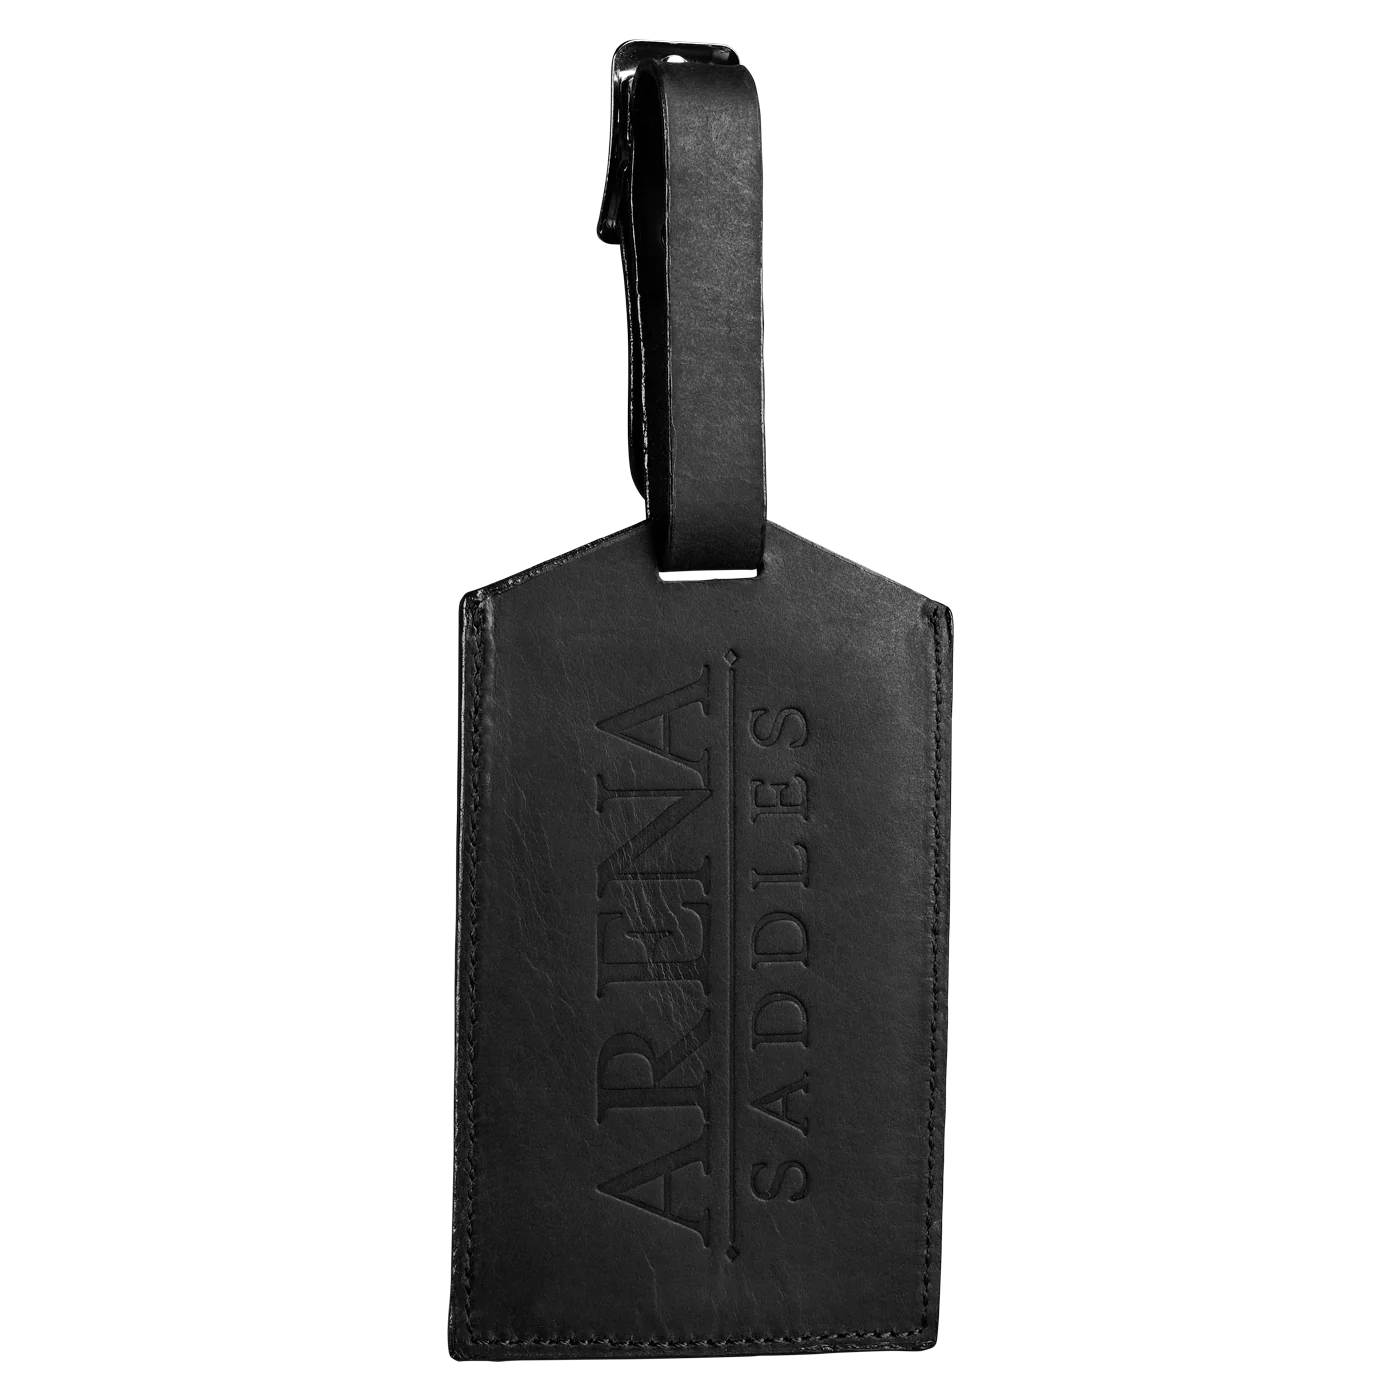 Arena Leather Luggage Tag